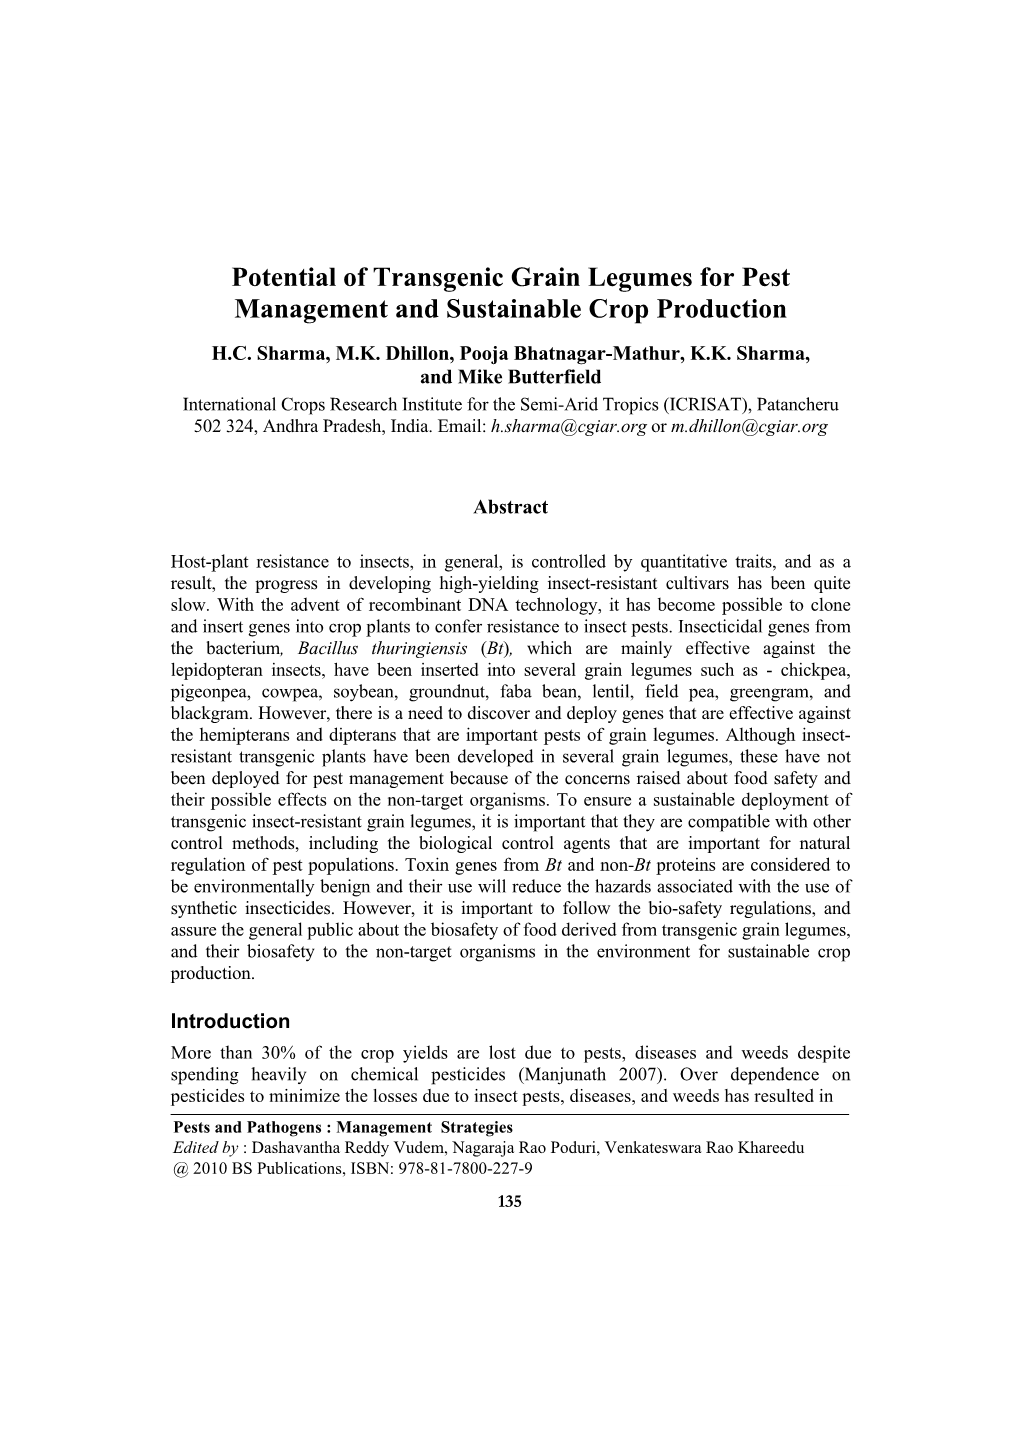 Potential of Transgenic Grain Legumes for Pest Management and Sustainable Crop Production H.C